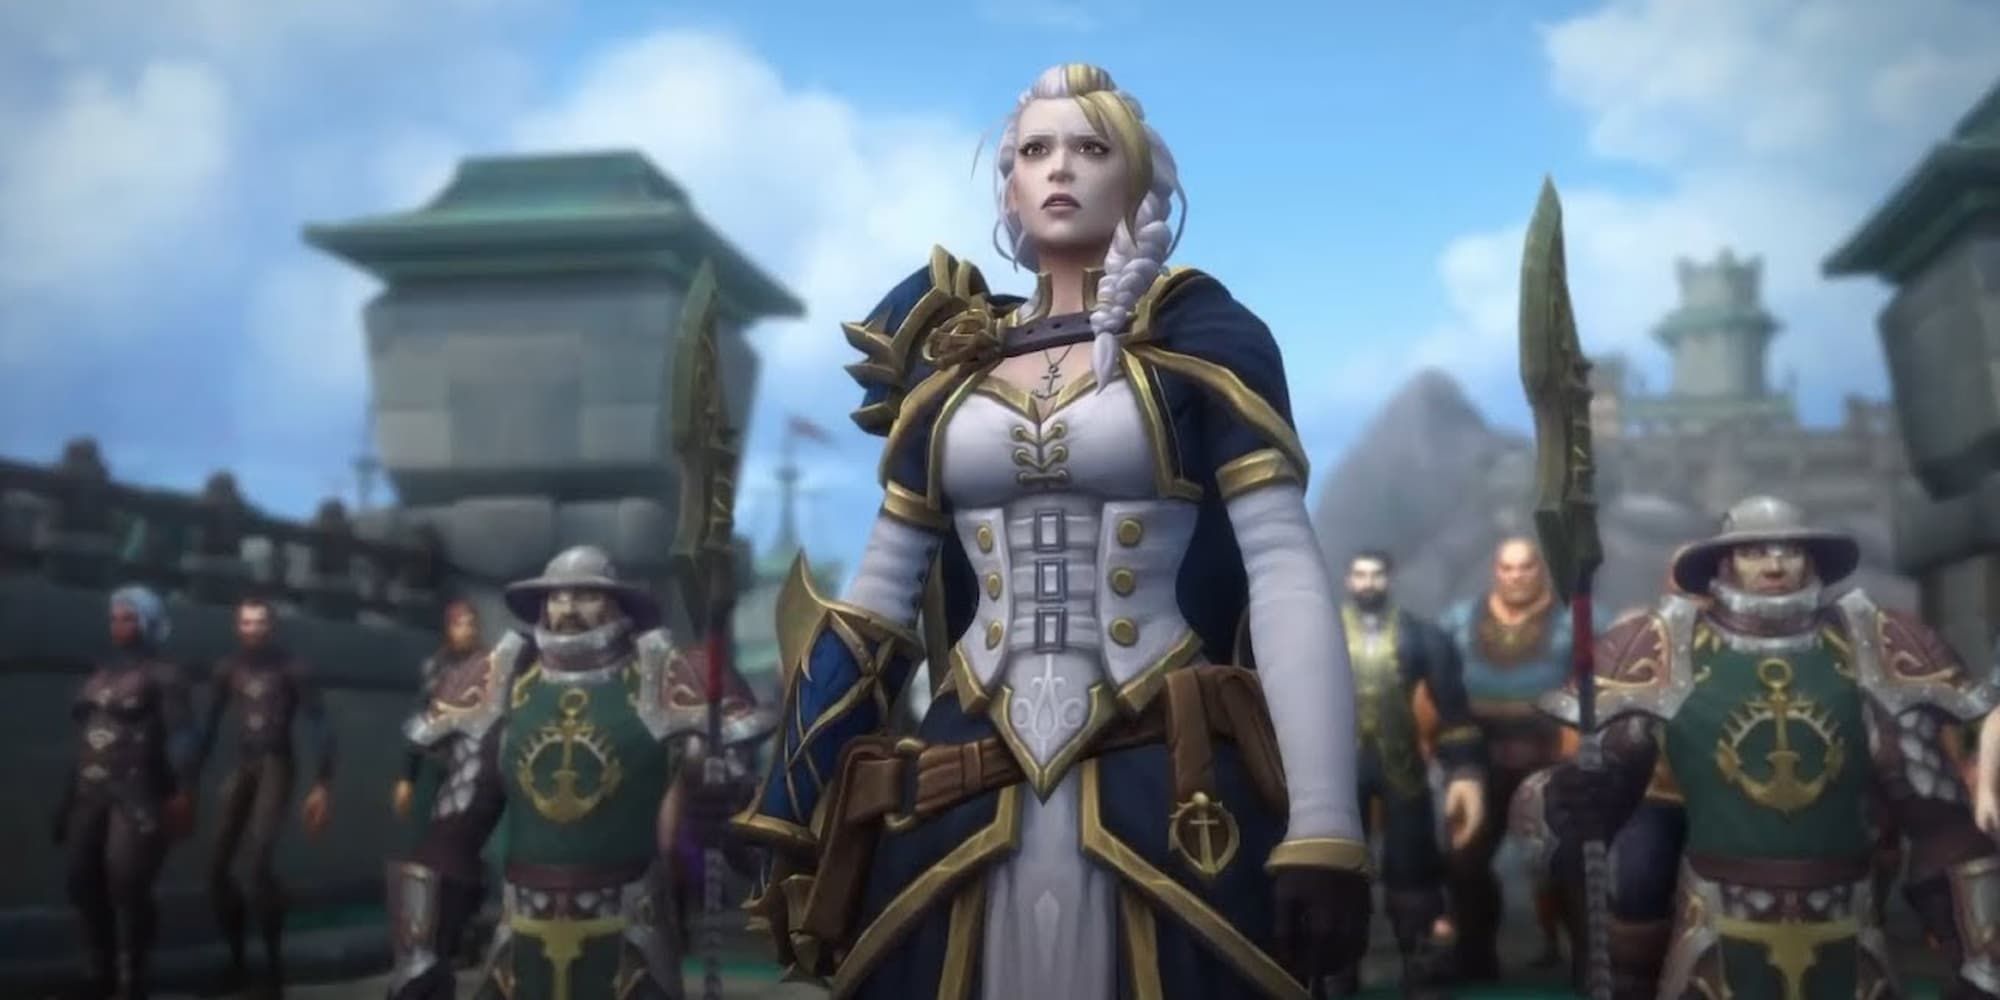 Jaina Proudmoore is centered, looking worried, with soldiers and townsfolk behind her.